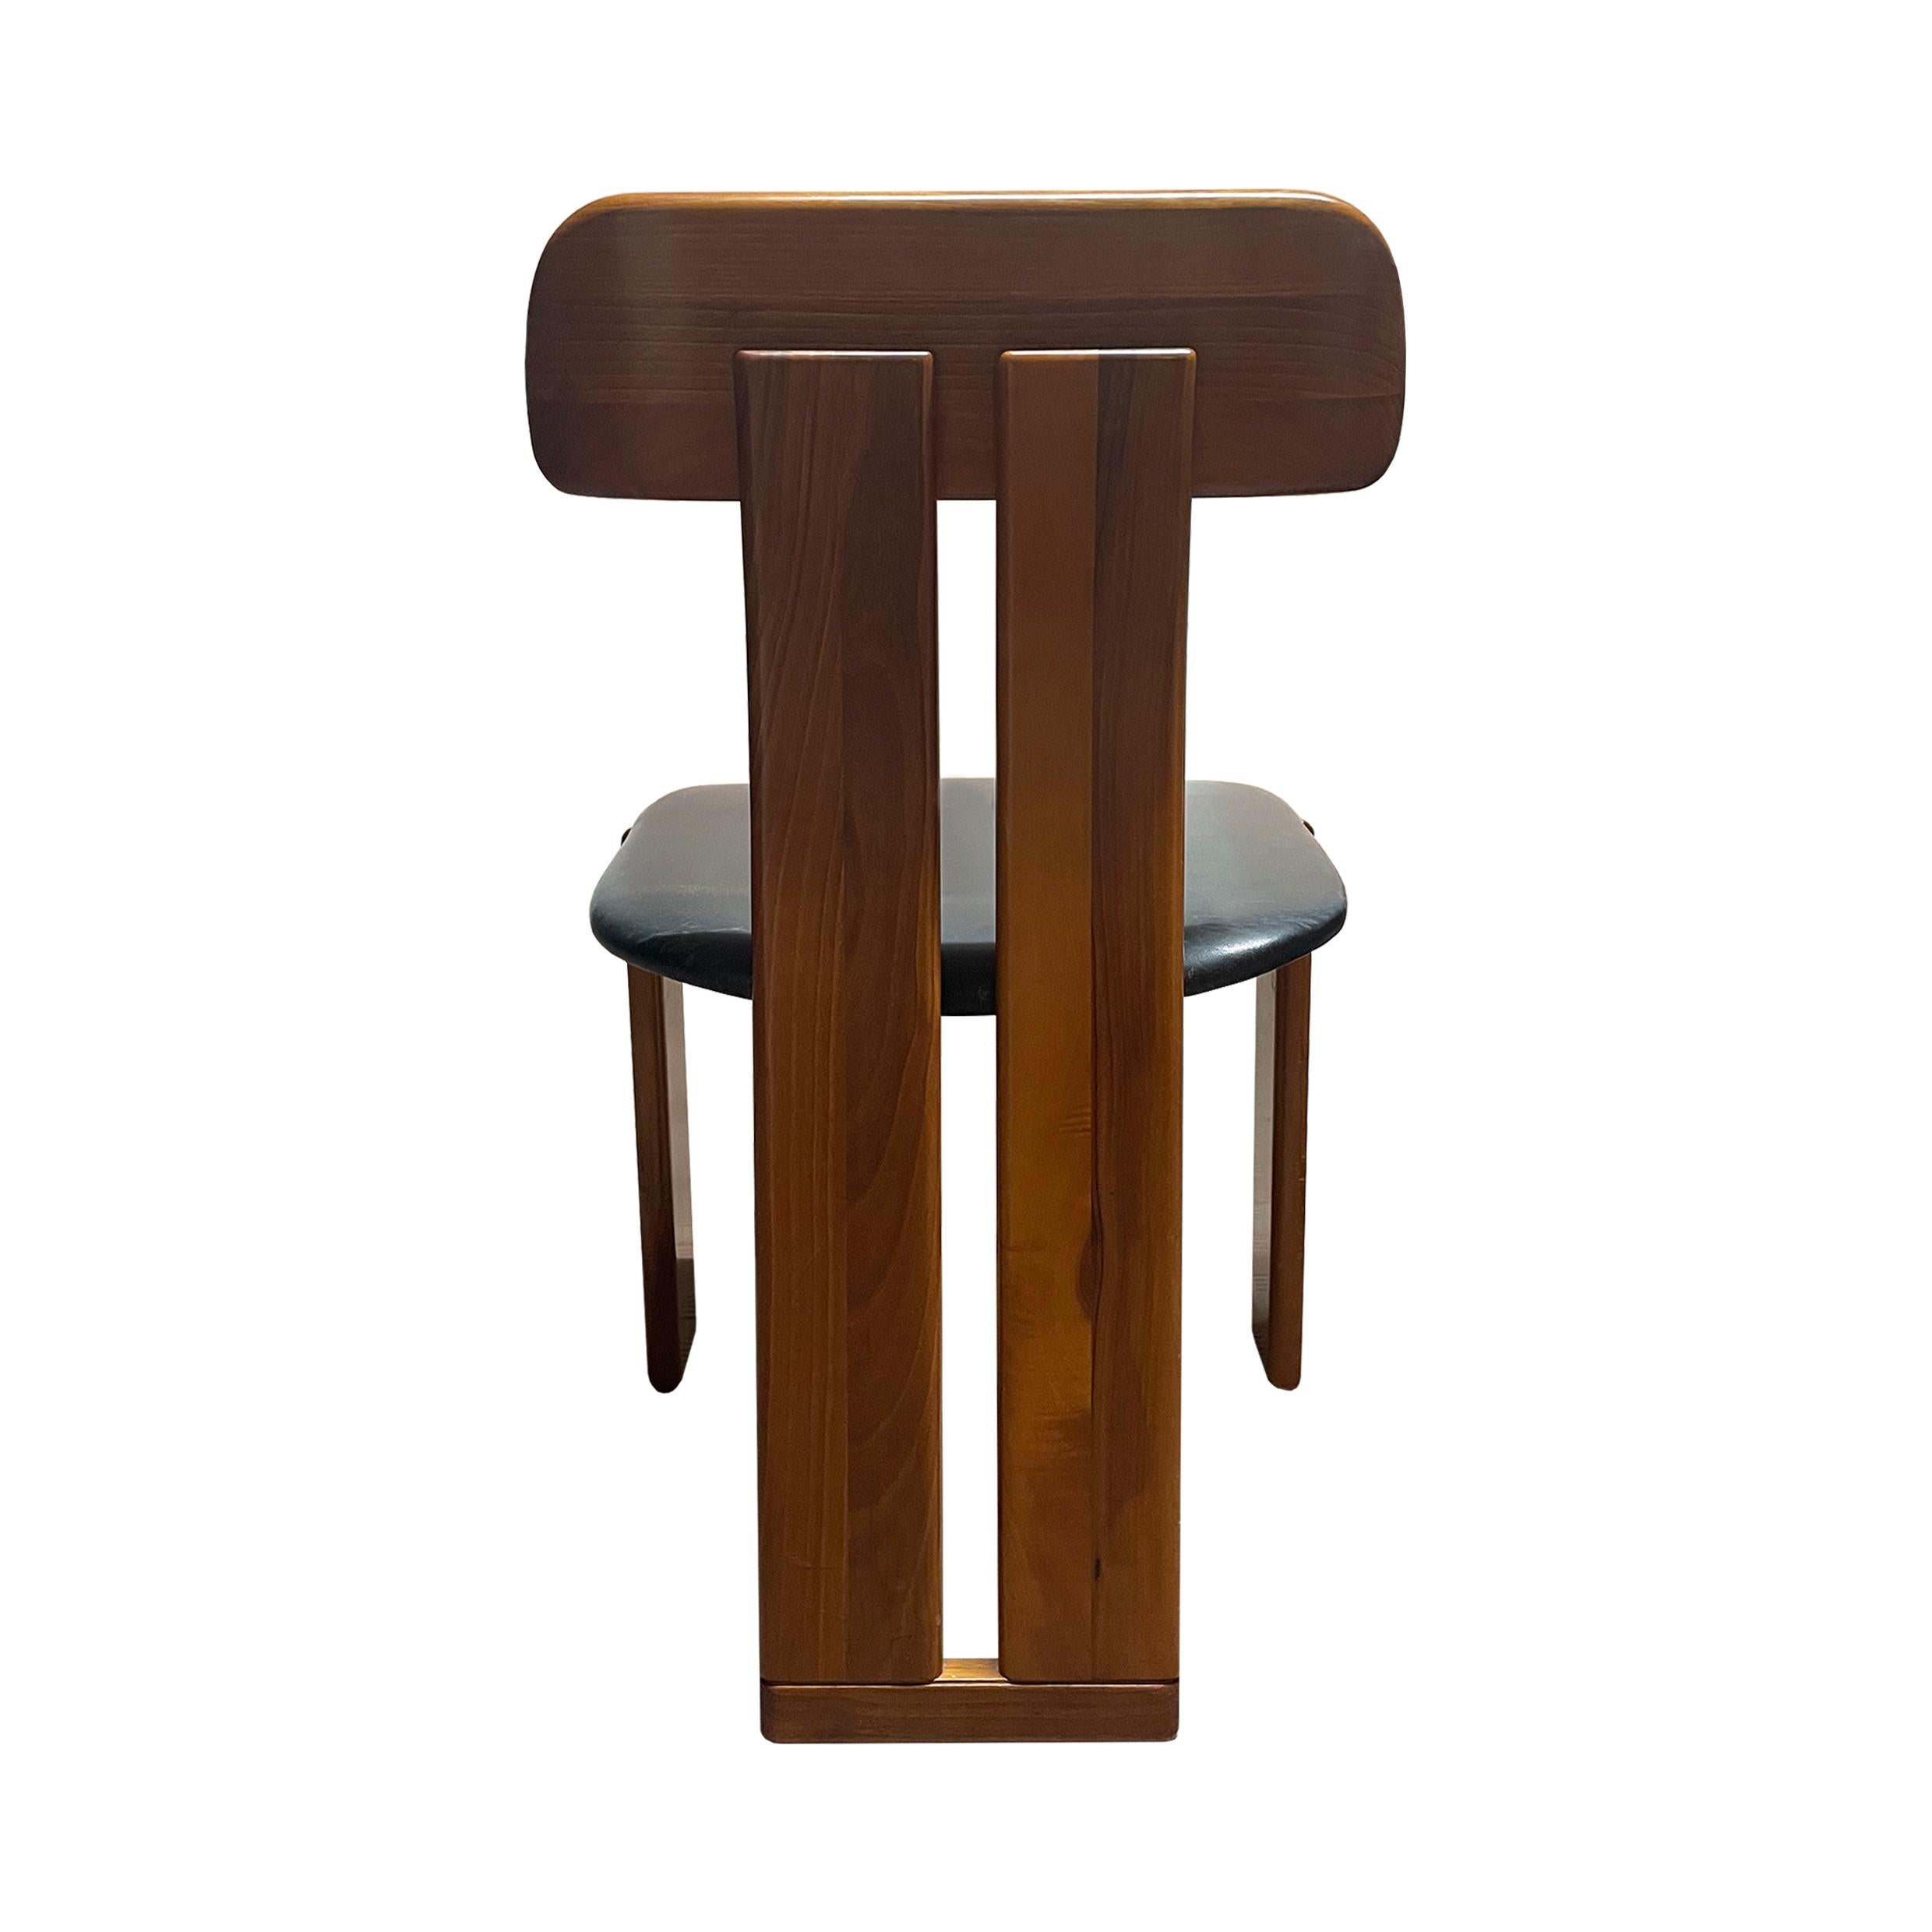 Mario Marenco Walnut Sapporo Dining Chairs for Mobilgirgi, 1970s, Set of 4 In Good Condition For Sale In Vicenza, IT